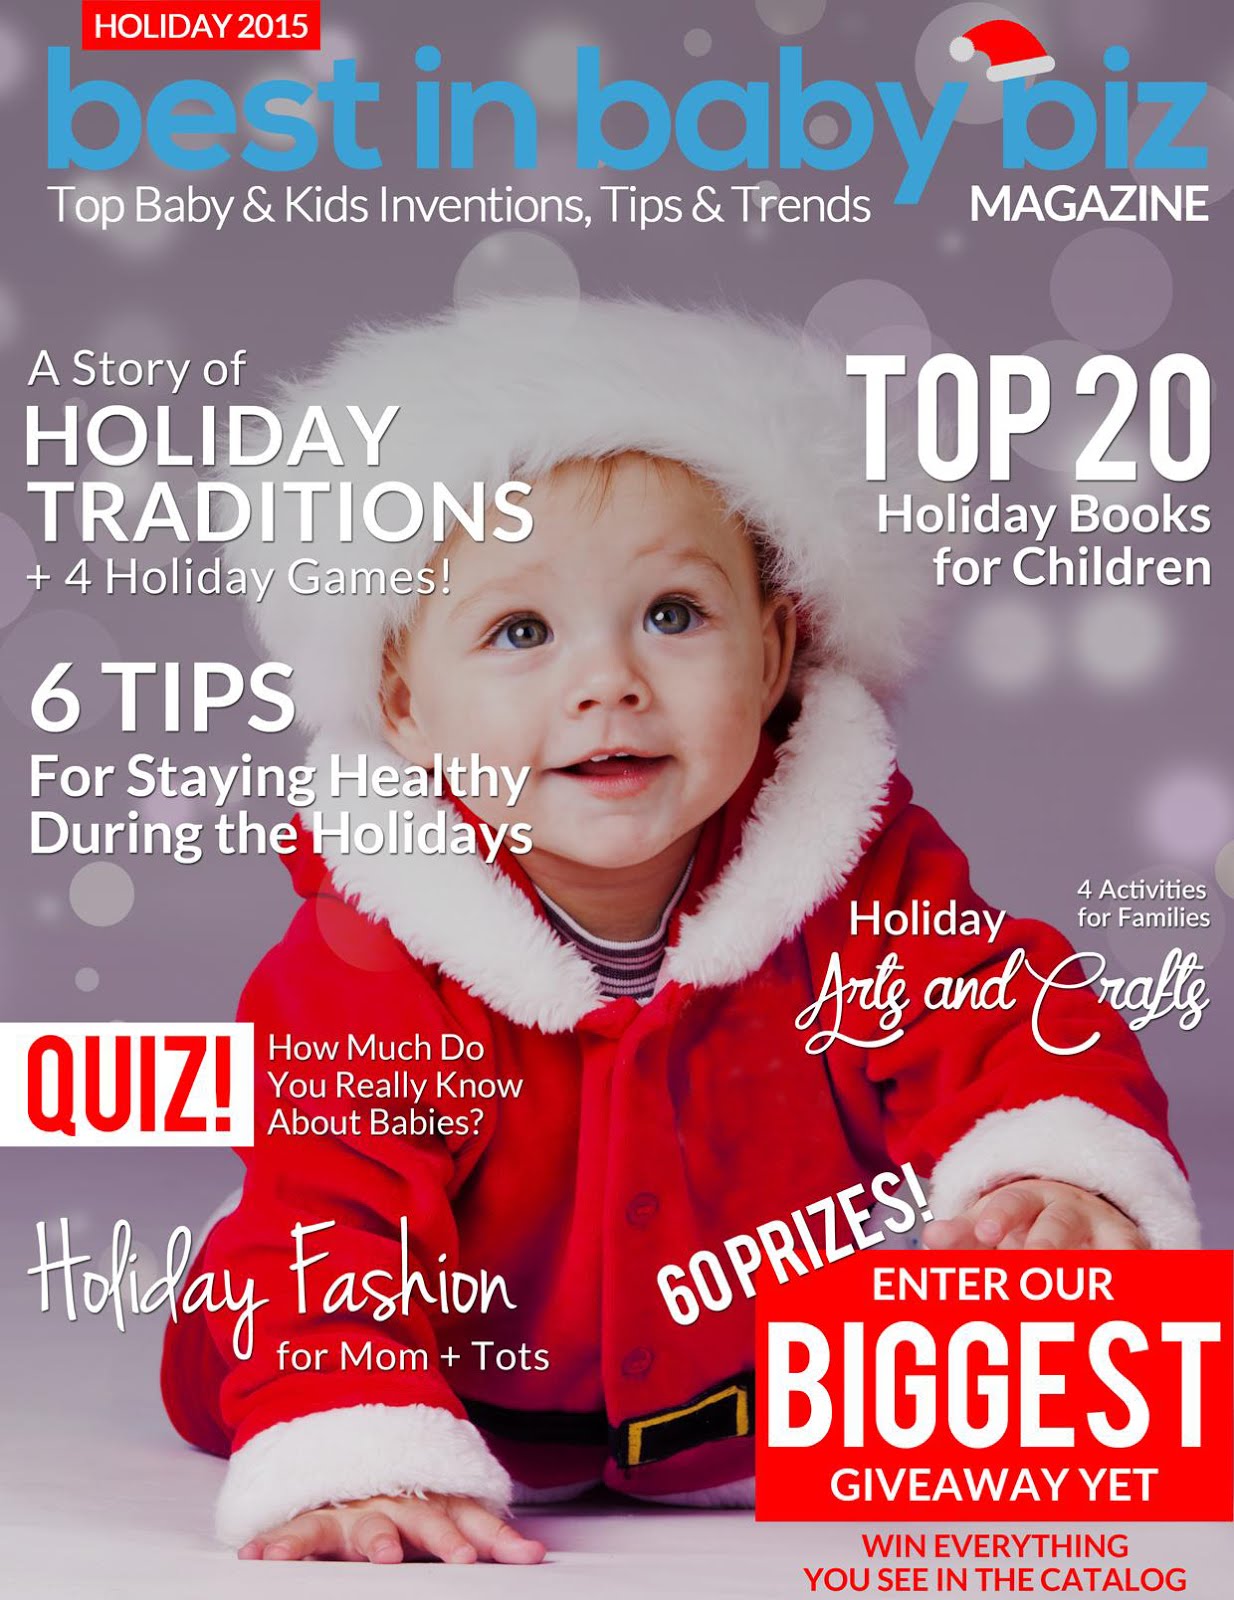 Genesis 950 was featured in the 2015 Best In Baby Biz Holiday Gift Guide